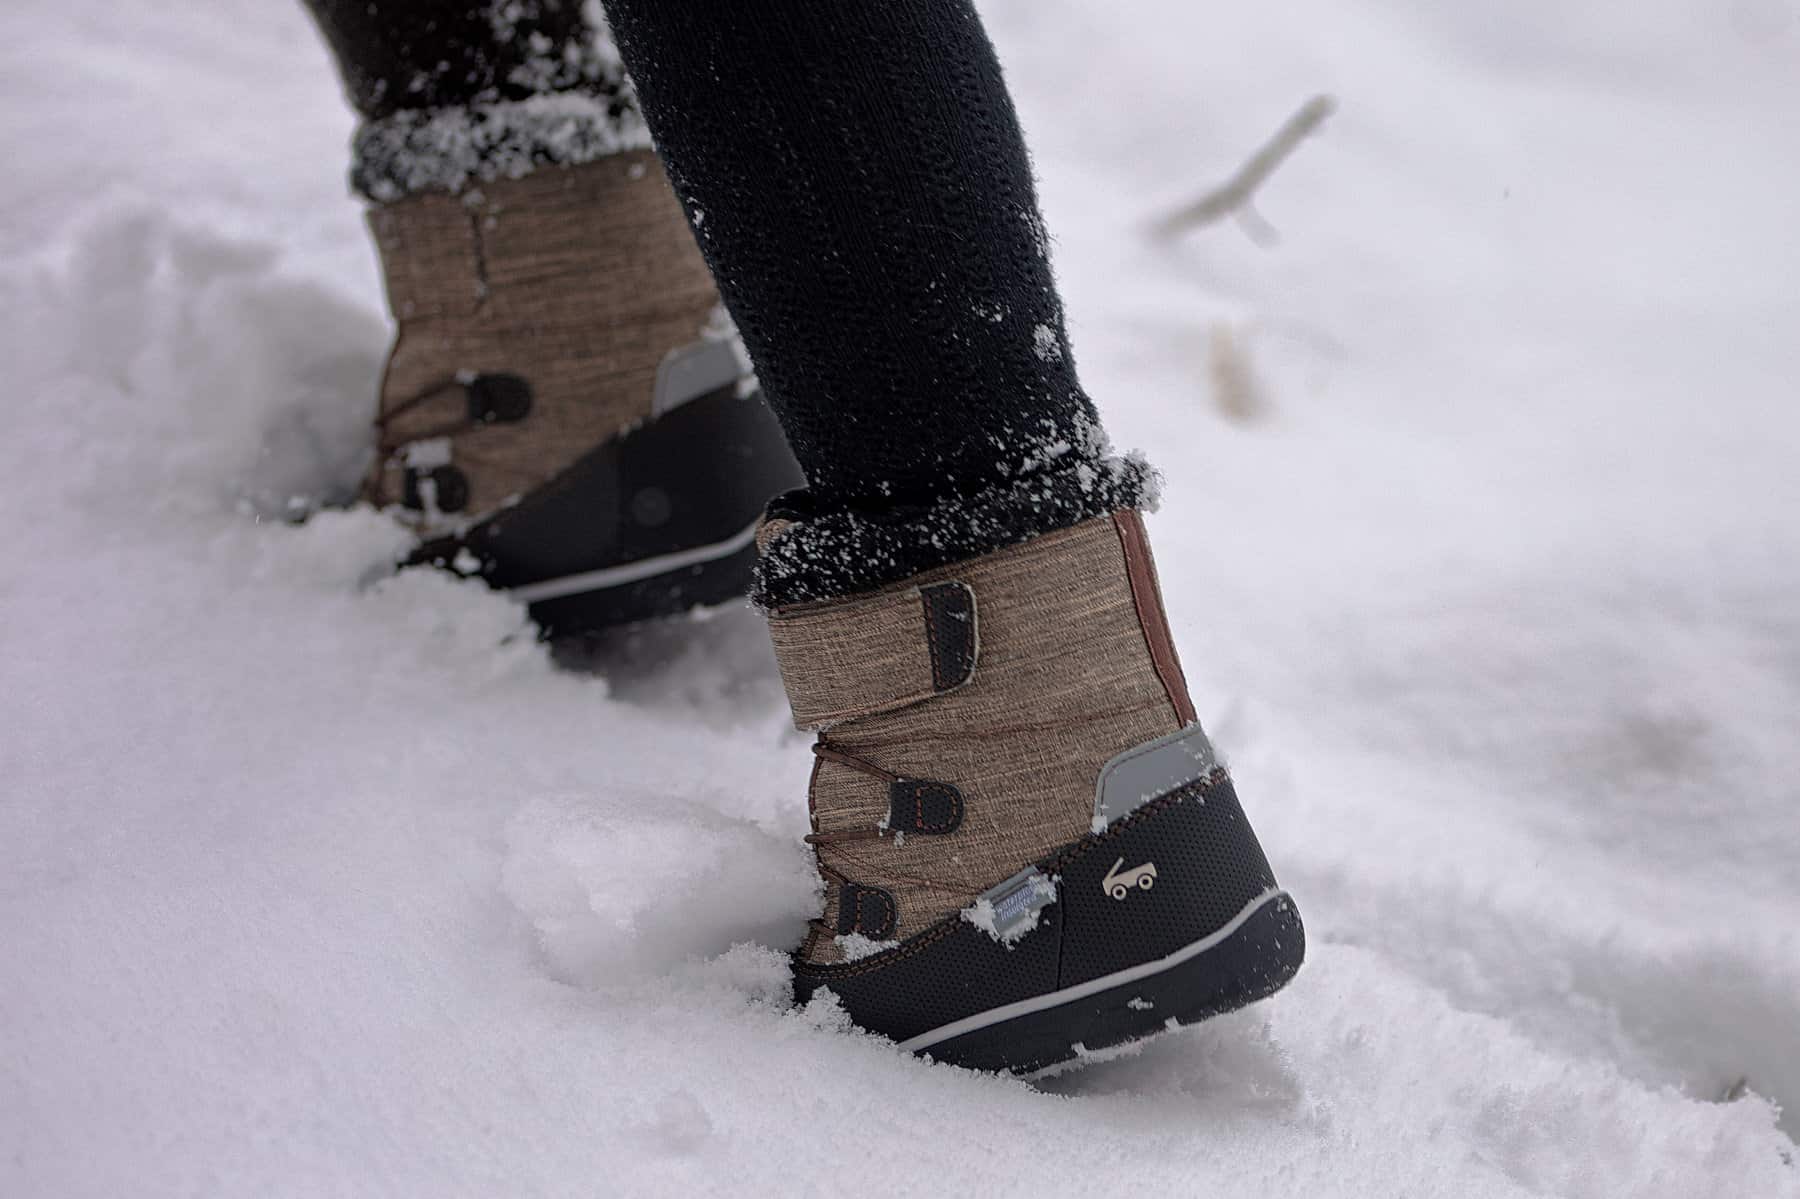 The Best Barefoot Winter Boots for Kids That Play!